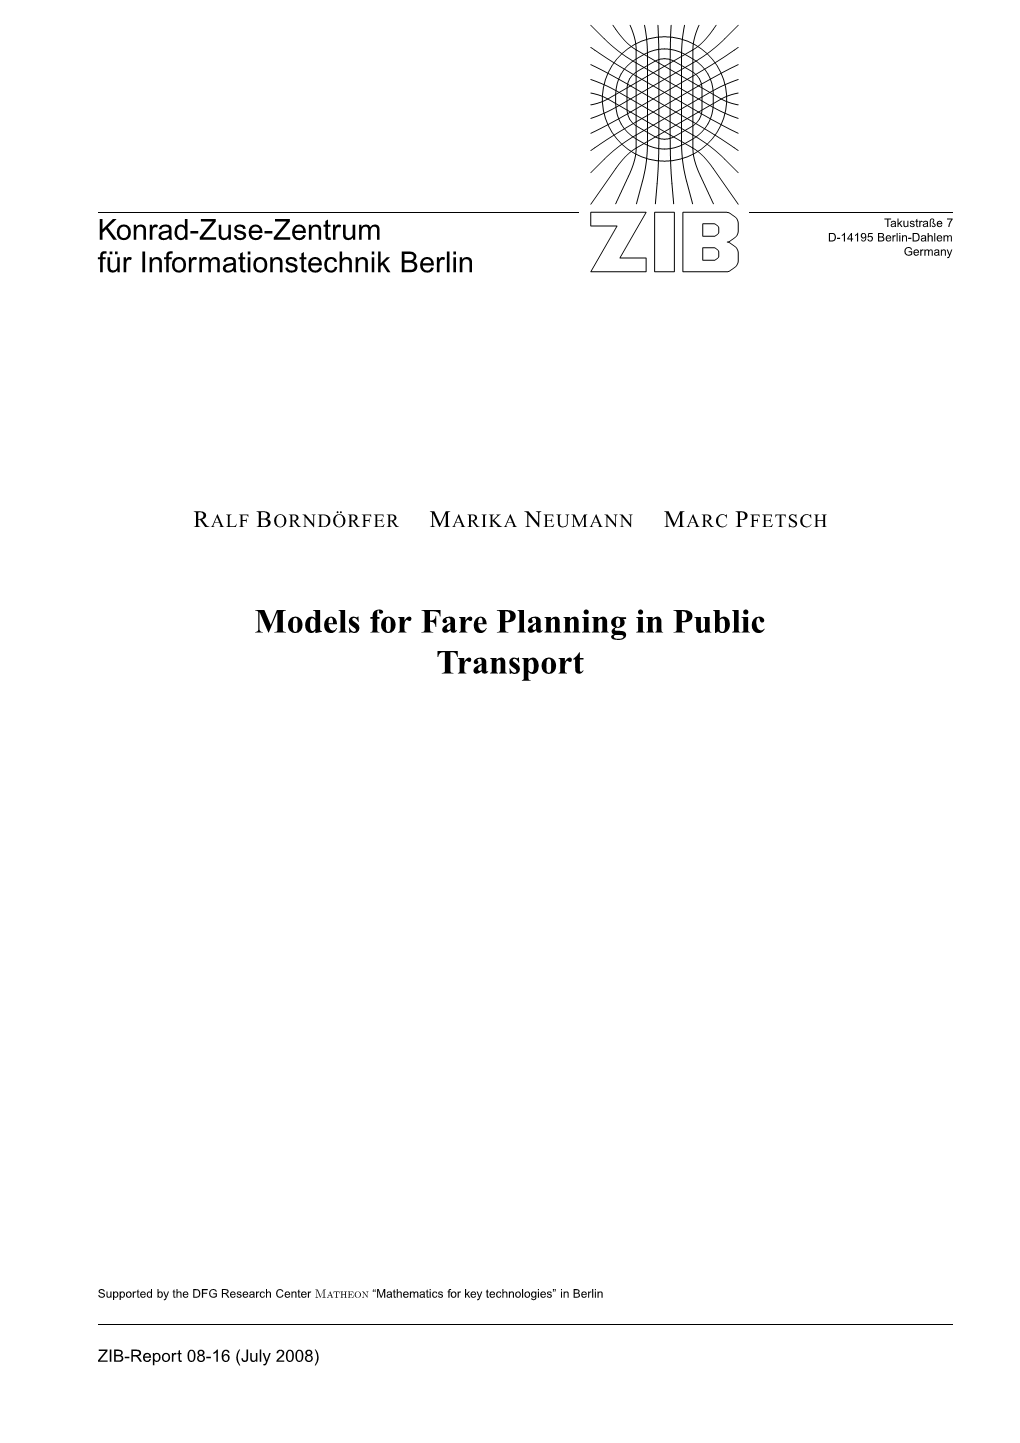 Models for Fare Planning in Public Transport